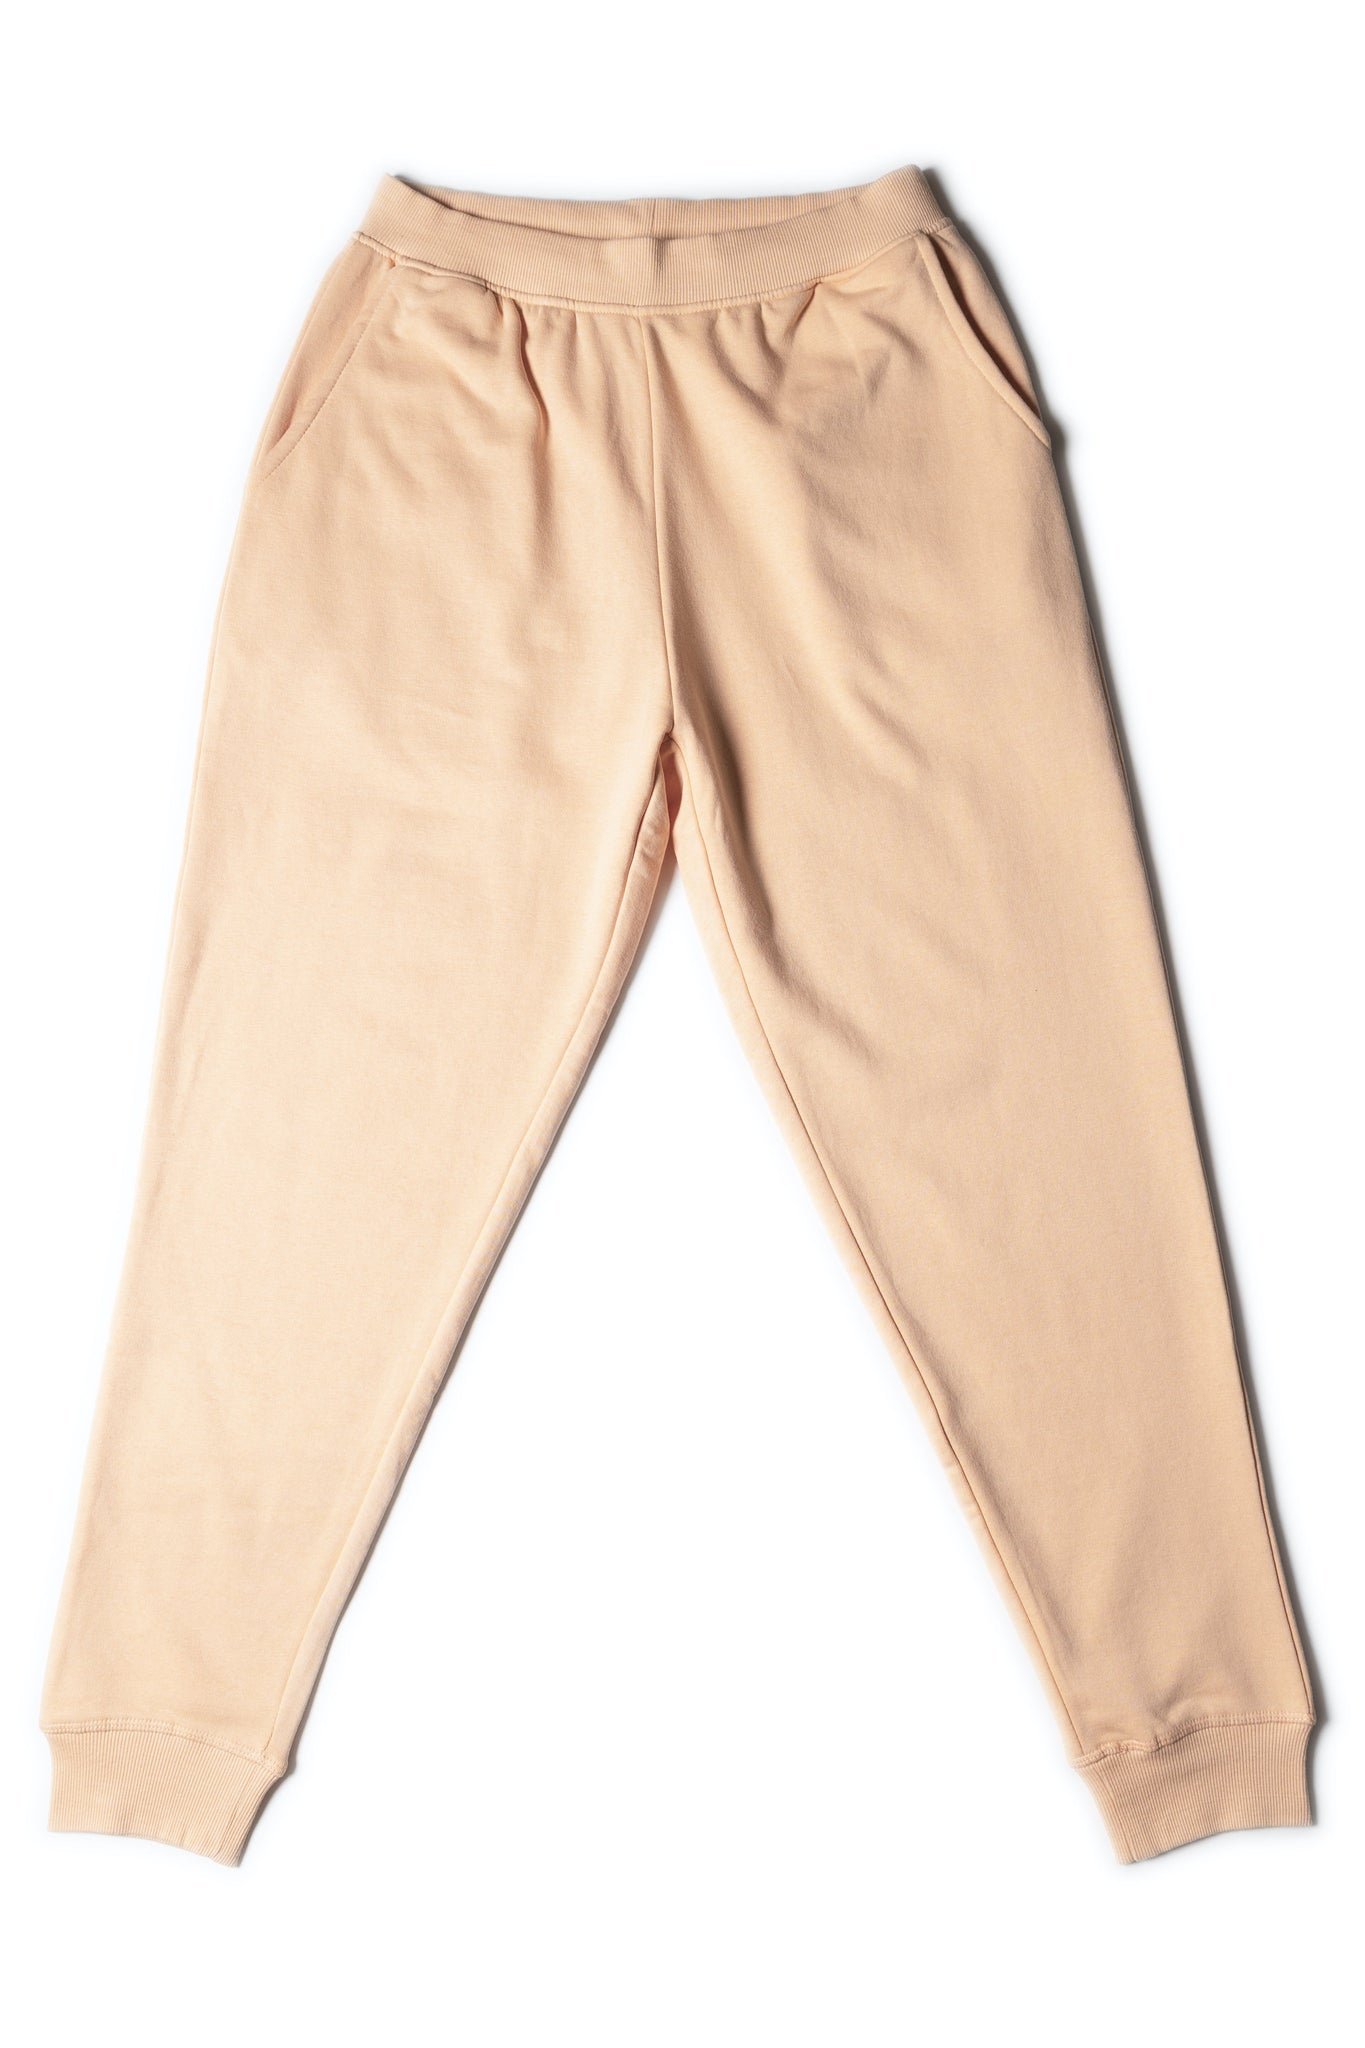 HERO - 5020R Youth Joggers - Peach (Relaxed Fit) XL